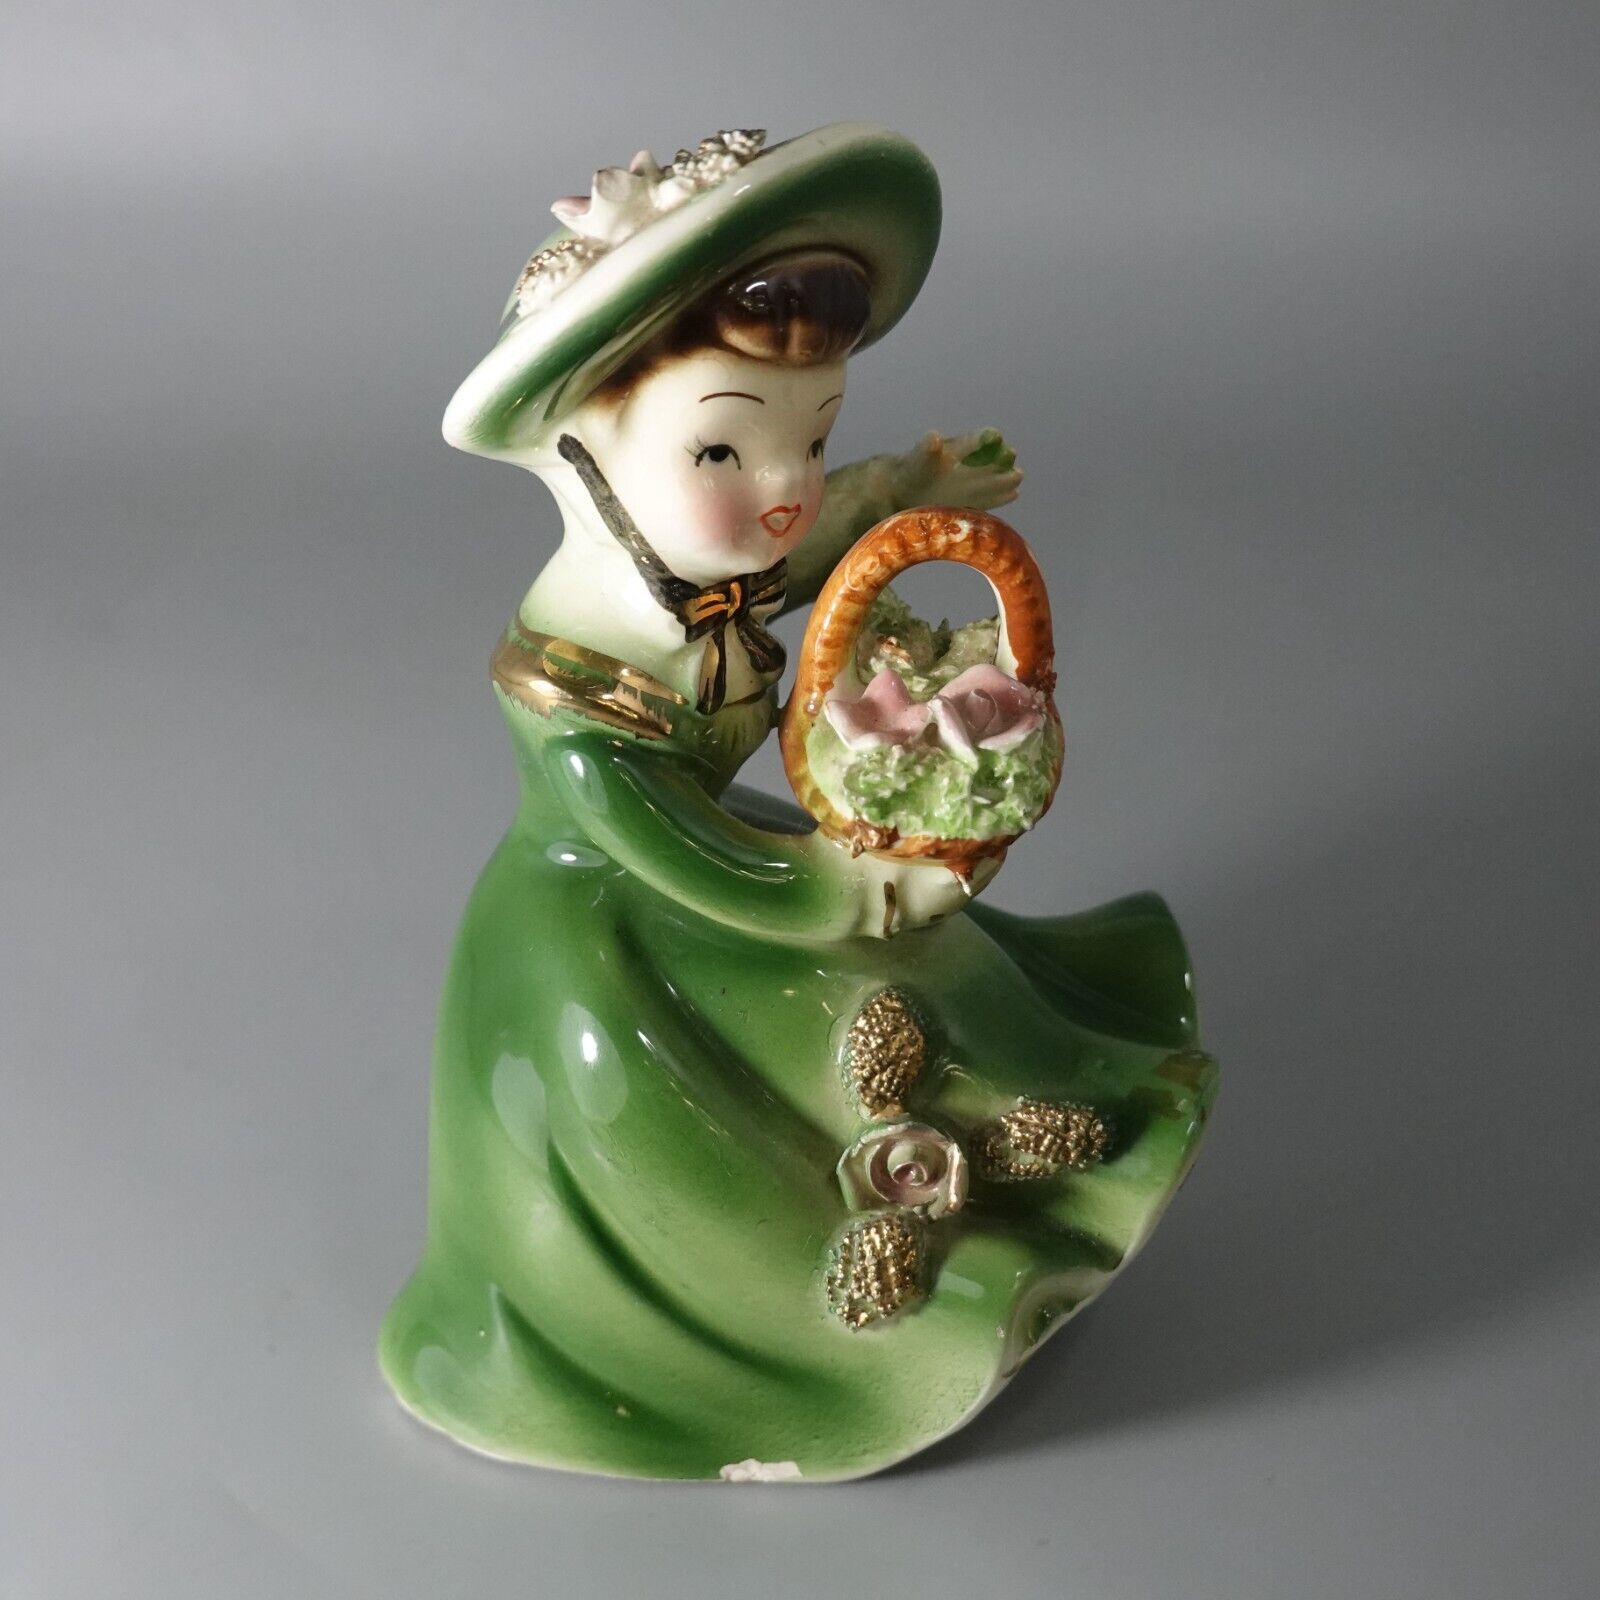 Vintage Victorian Woman In Green Dress With Basket Porcelain Figurine -5\